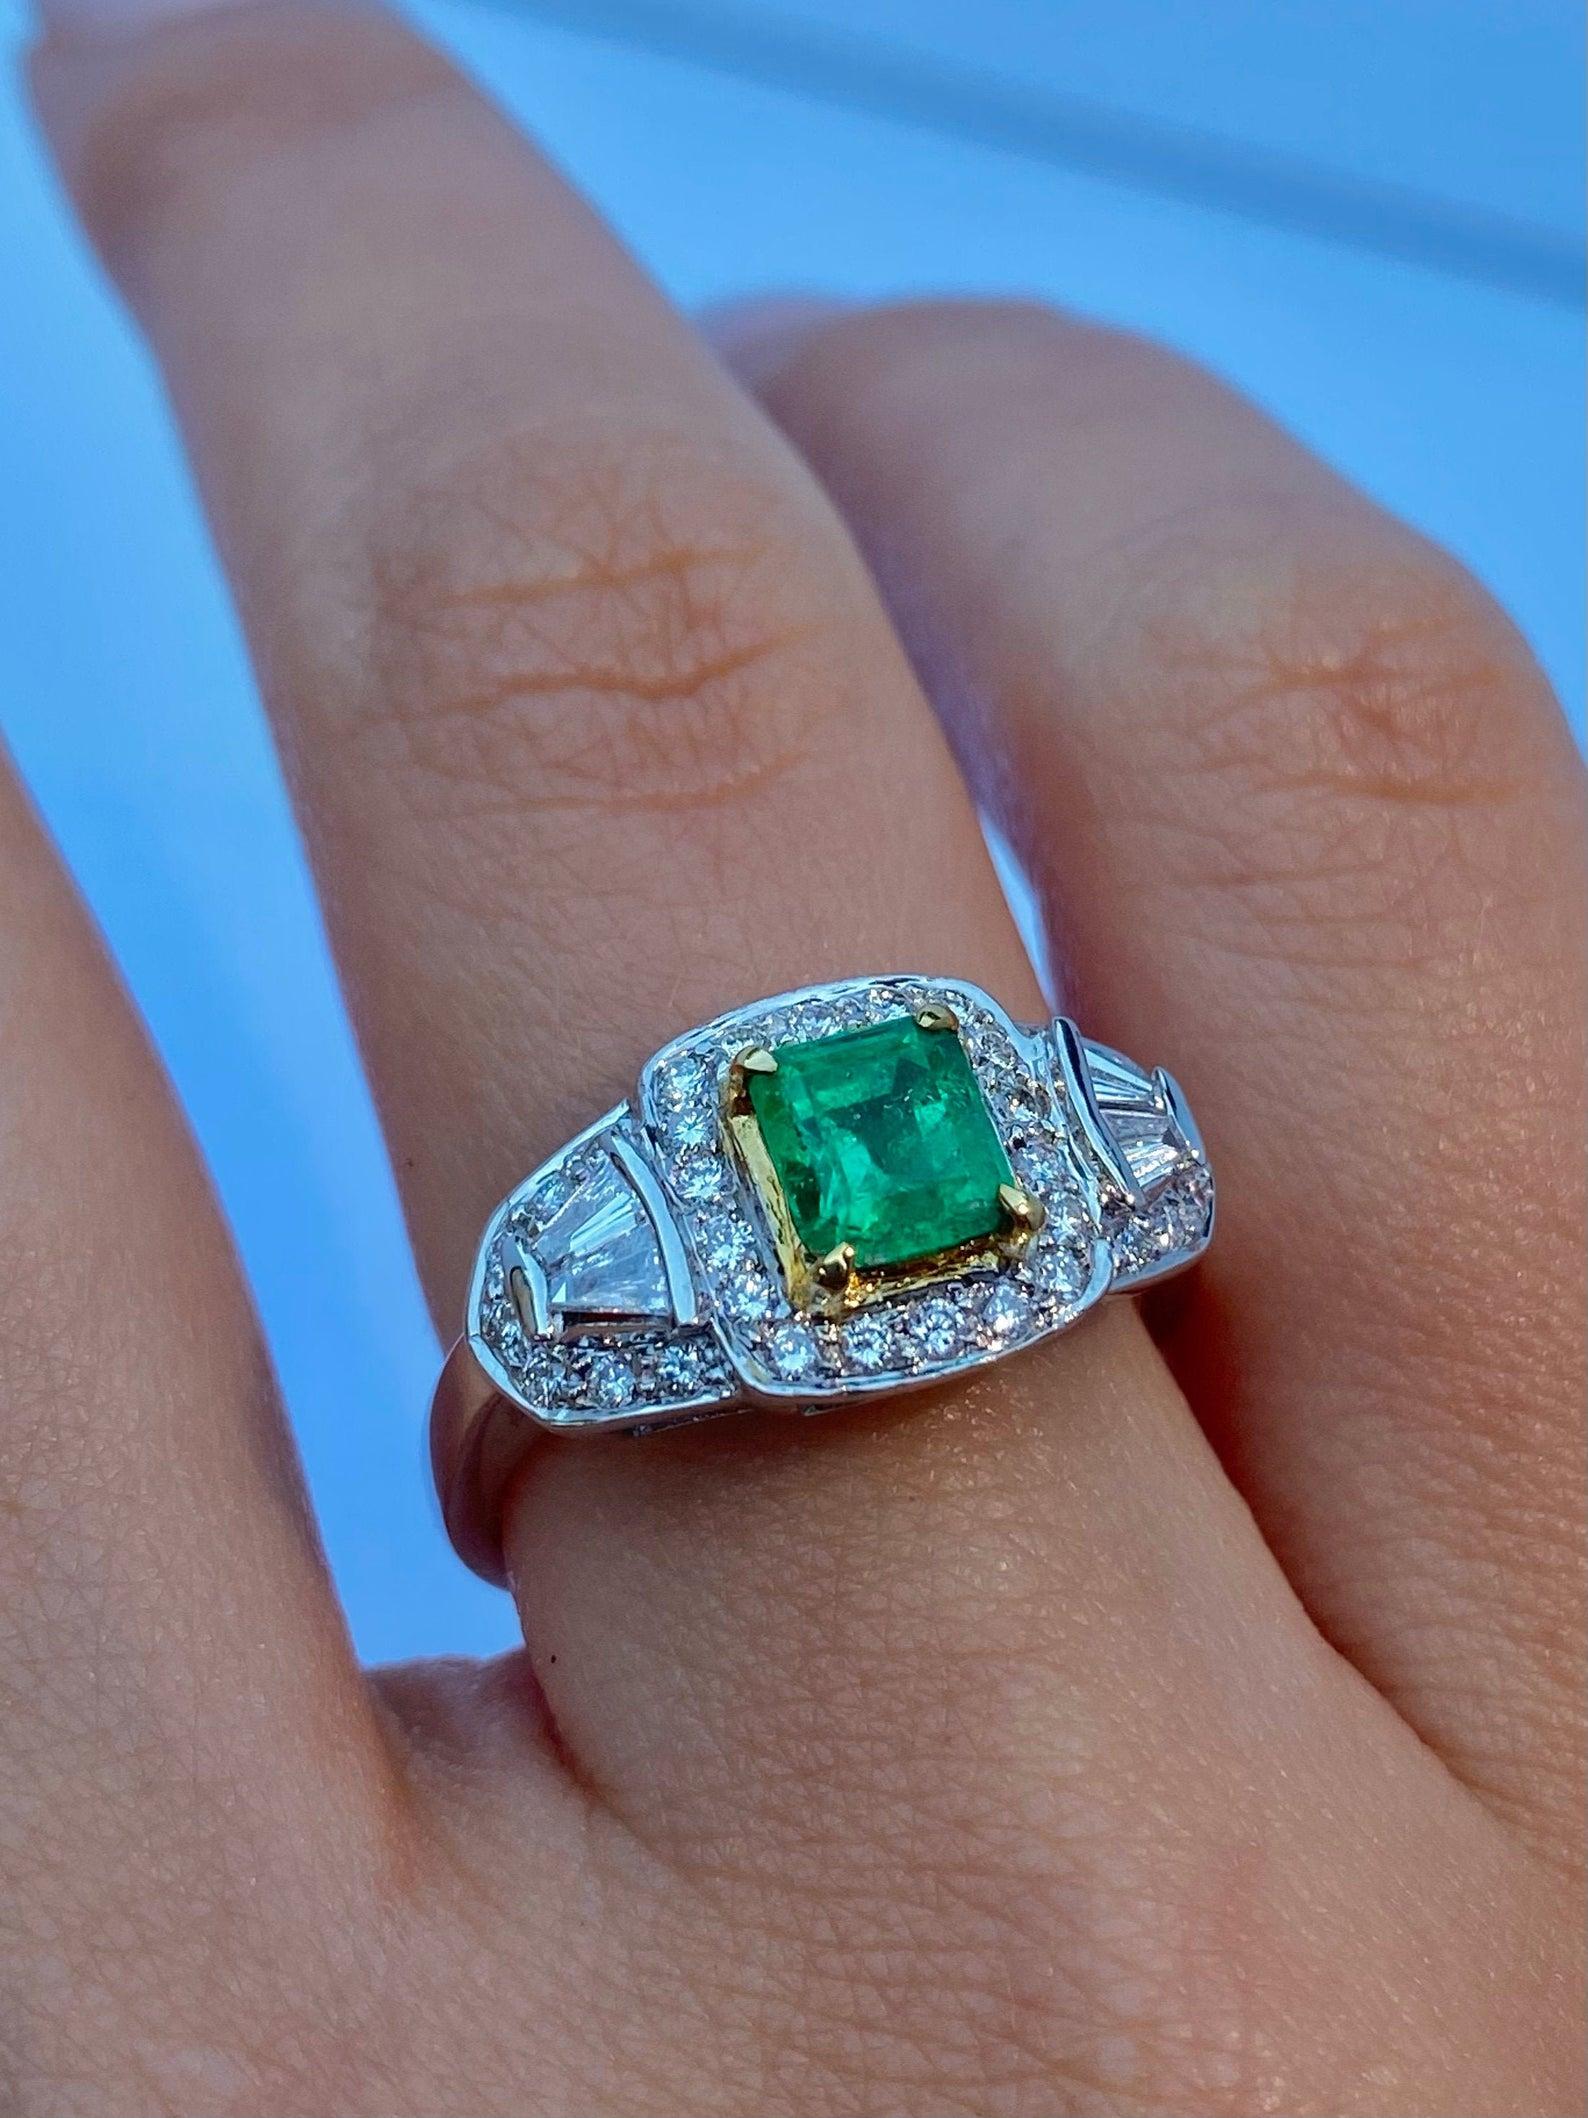 2 Carat Colombian Emerald, Baguette-Cut Diamonds, and 18 Karat White Gold Ring In Excellent Condition For Sale In Miami, FL